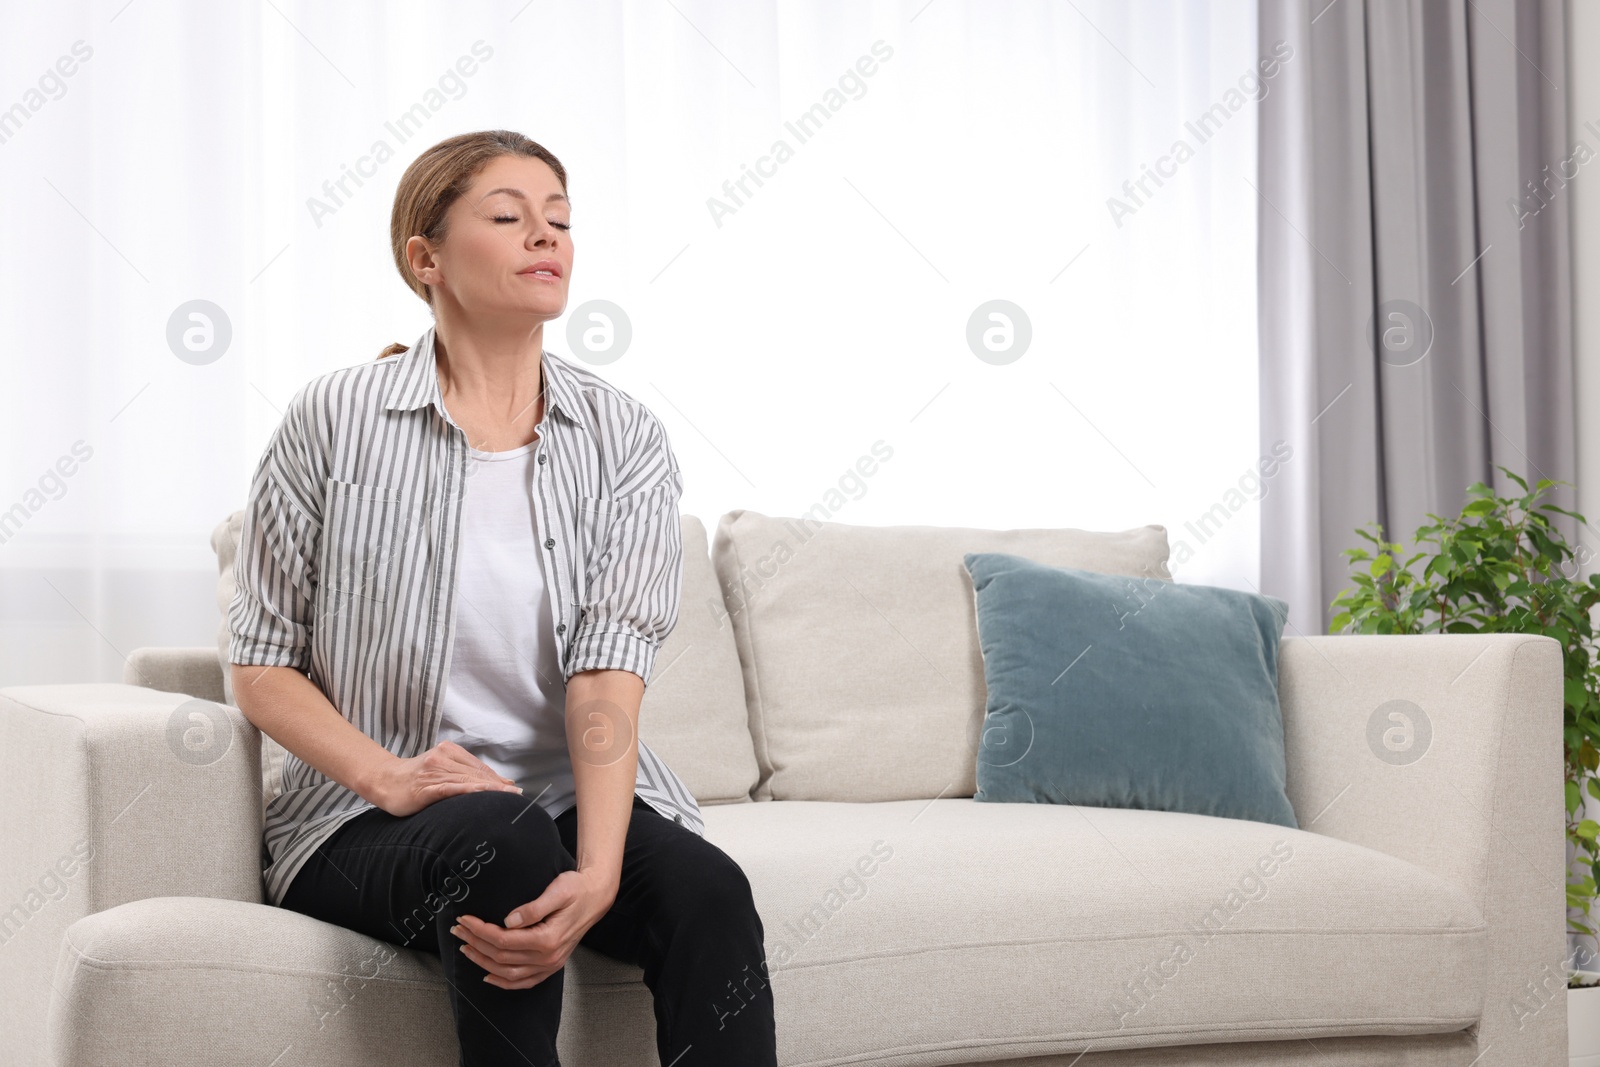 Photo of Woman suffering from knee pain on sofa indoors. Arthritis symptoms